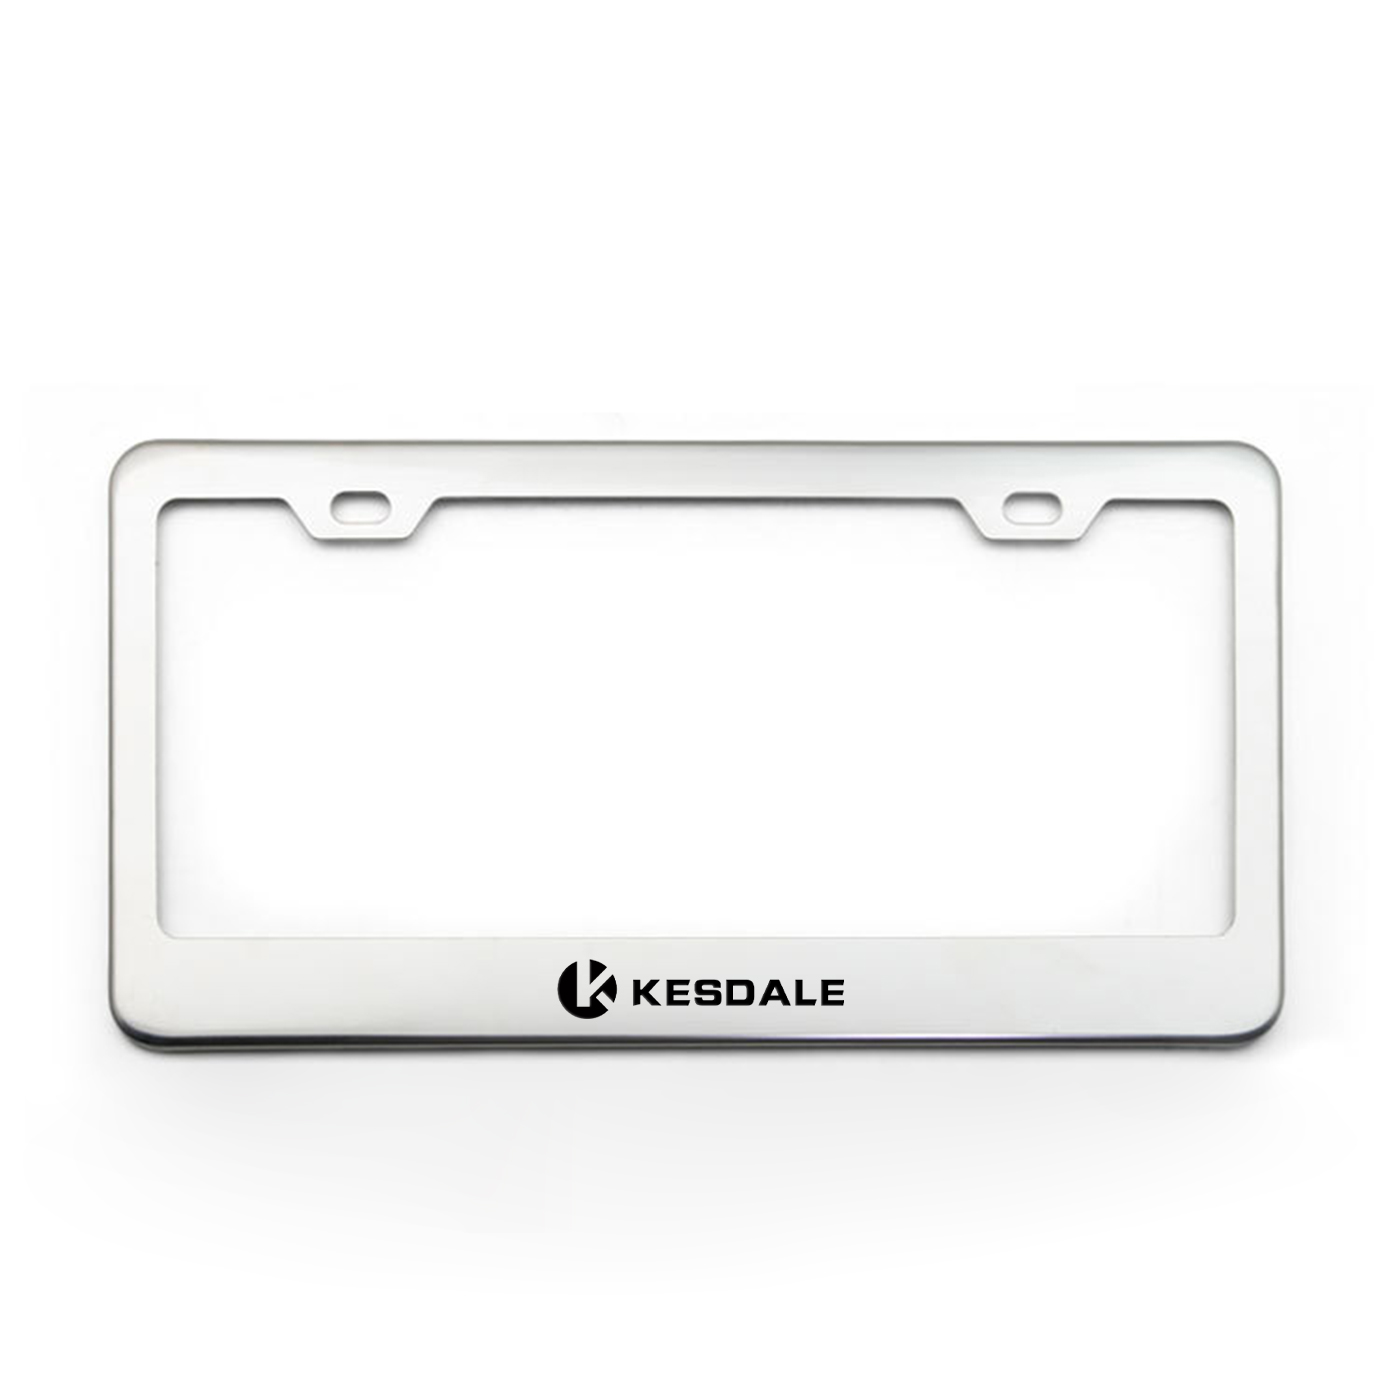 US Standard Stainless Steel License Plate Frame